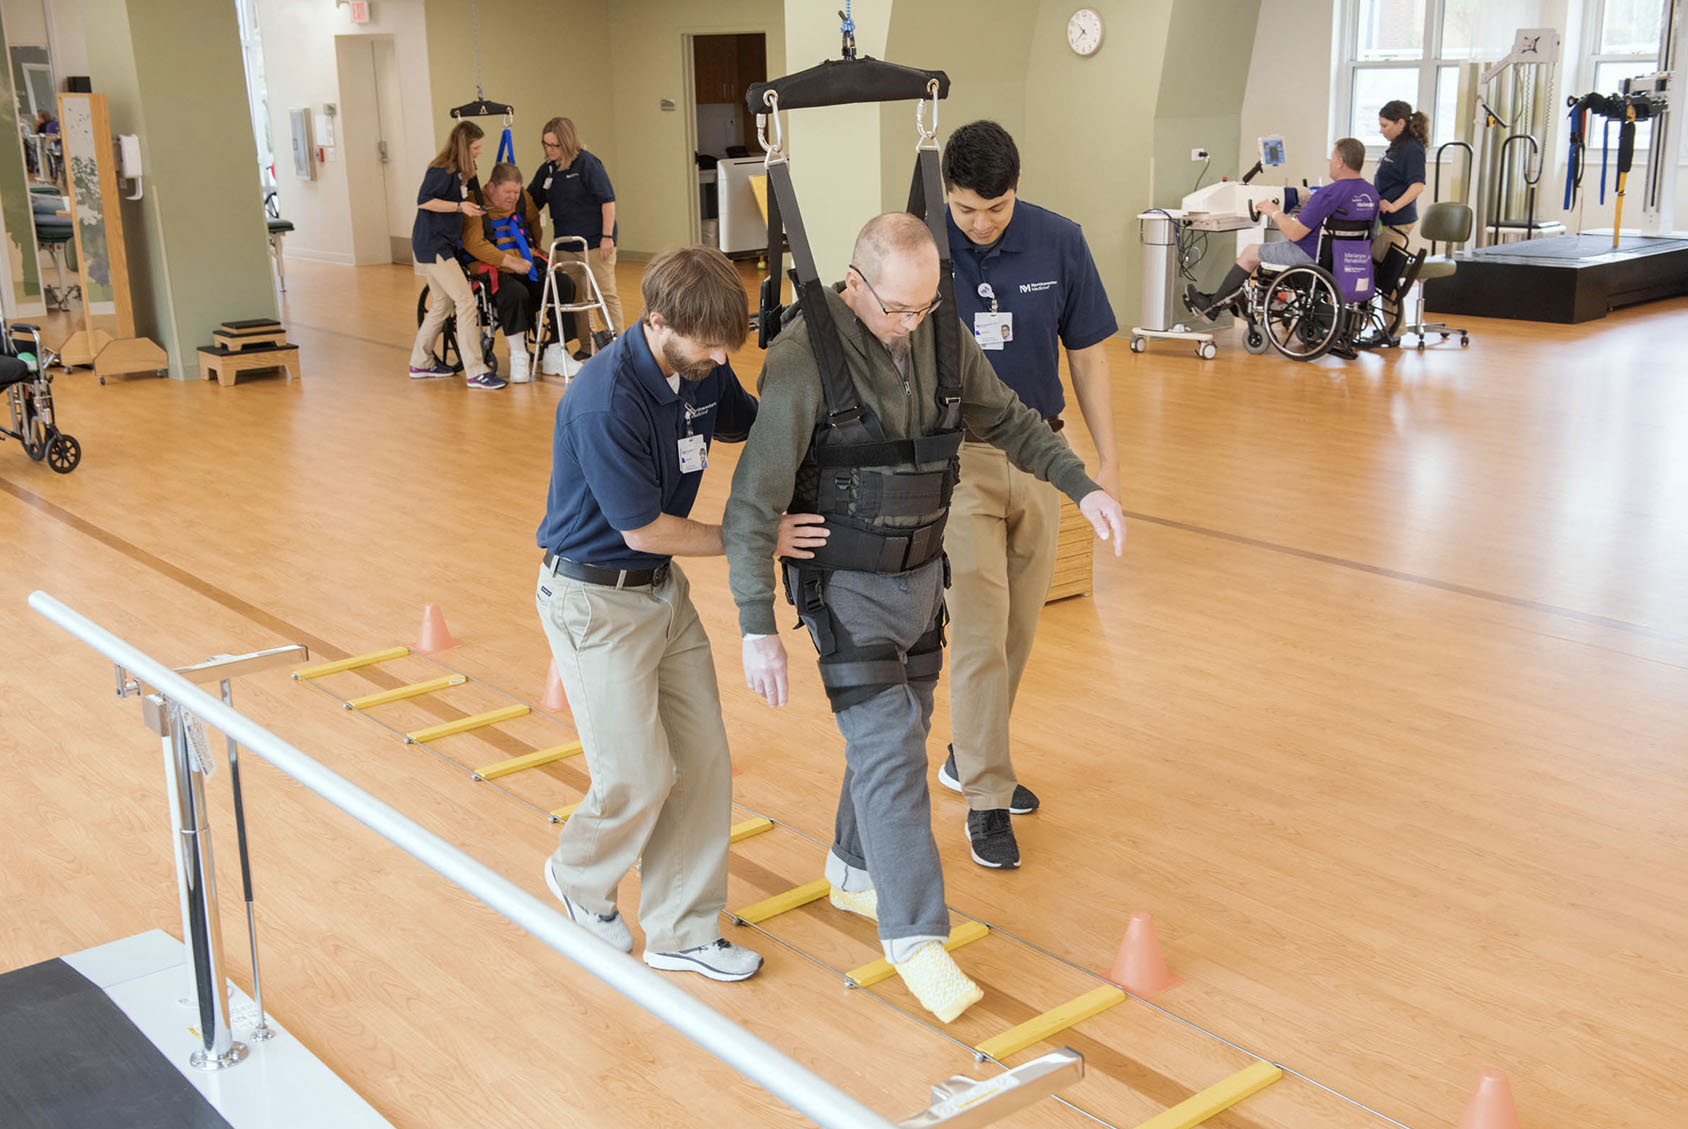 Clinicians helping patient to walk using an assistive device suspended from the ceiling.